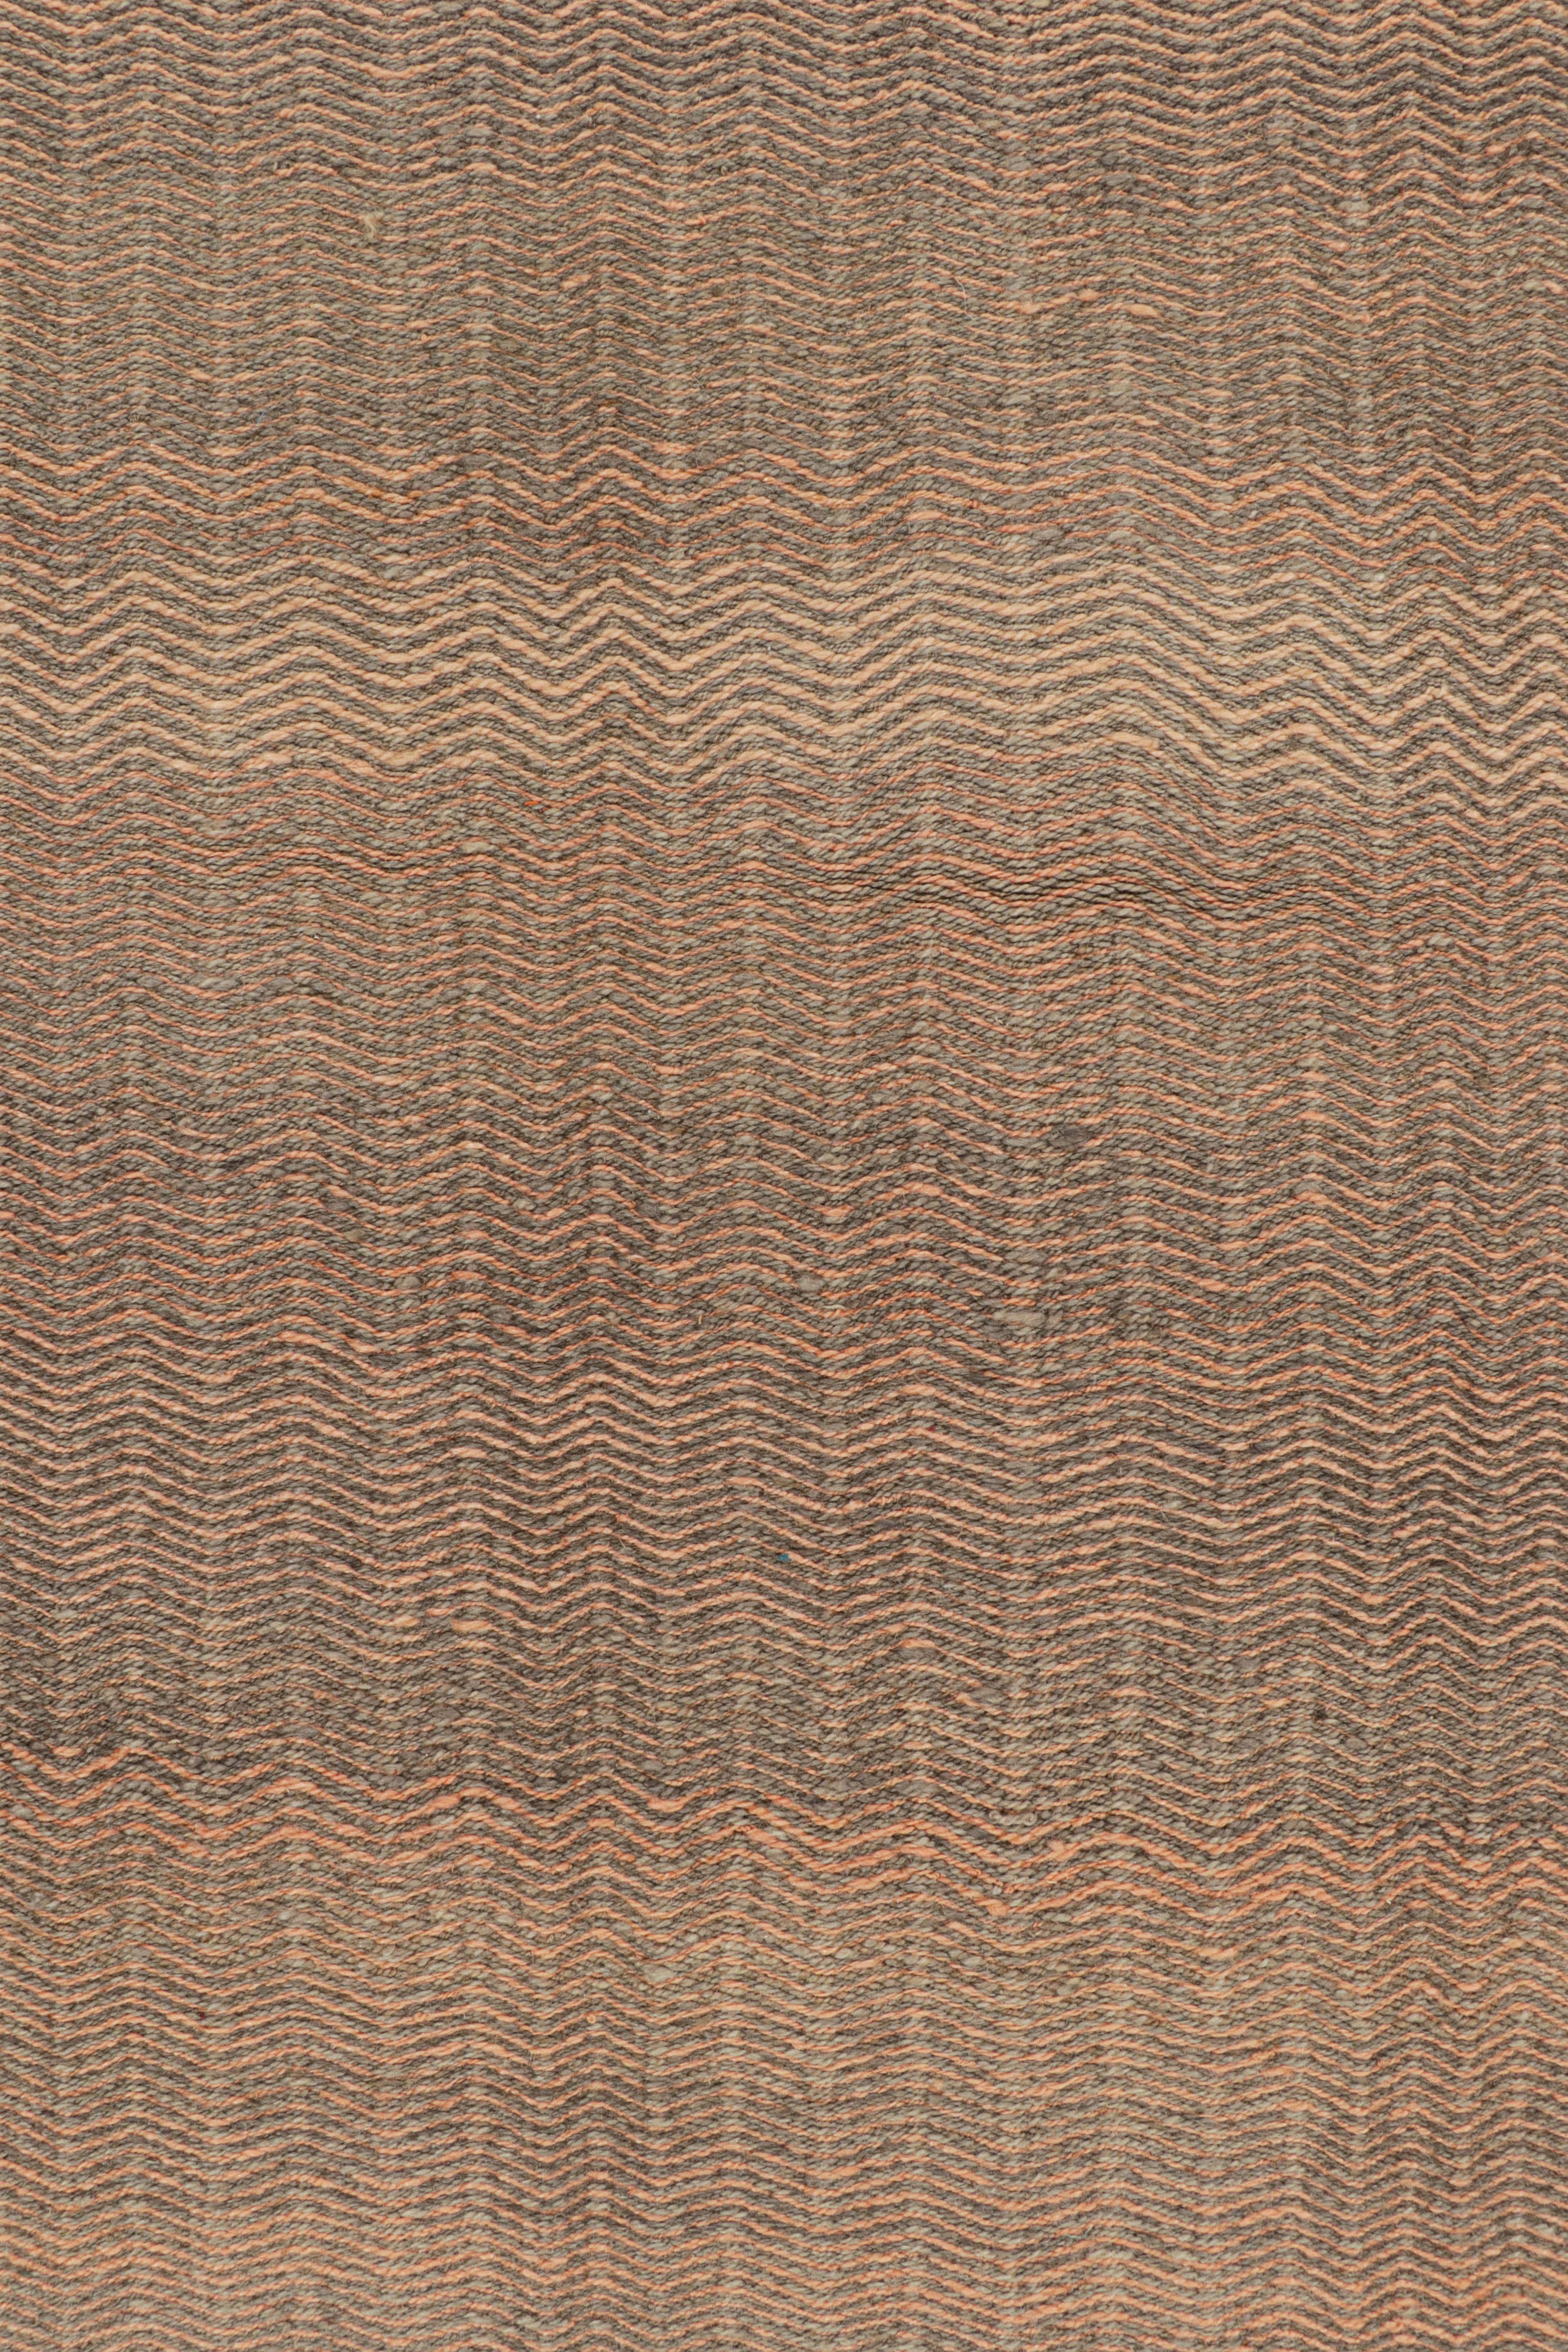 Rug & Kilim’s Contemporary Kilim Rug in Peach and Greige Chevrons In New Condition For Sale In Long Island City, NY